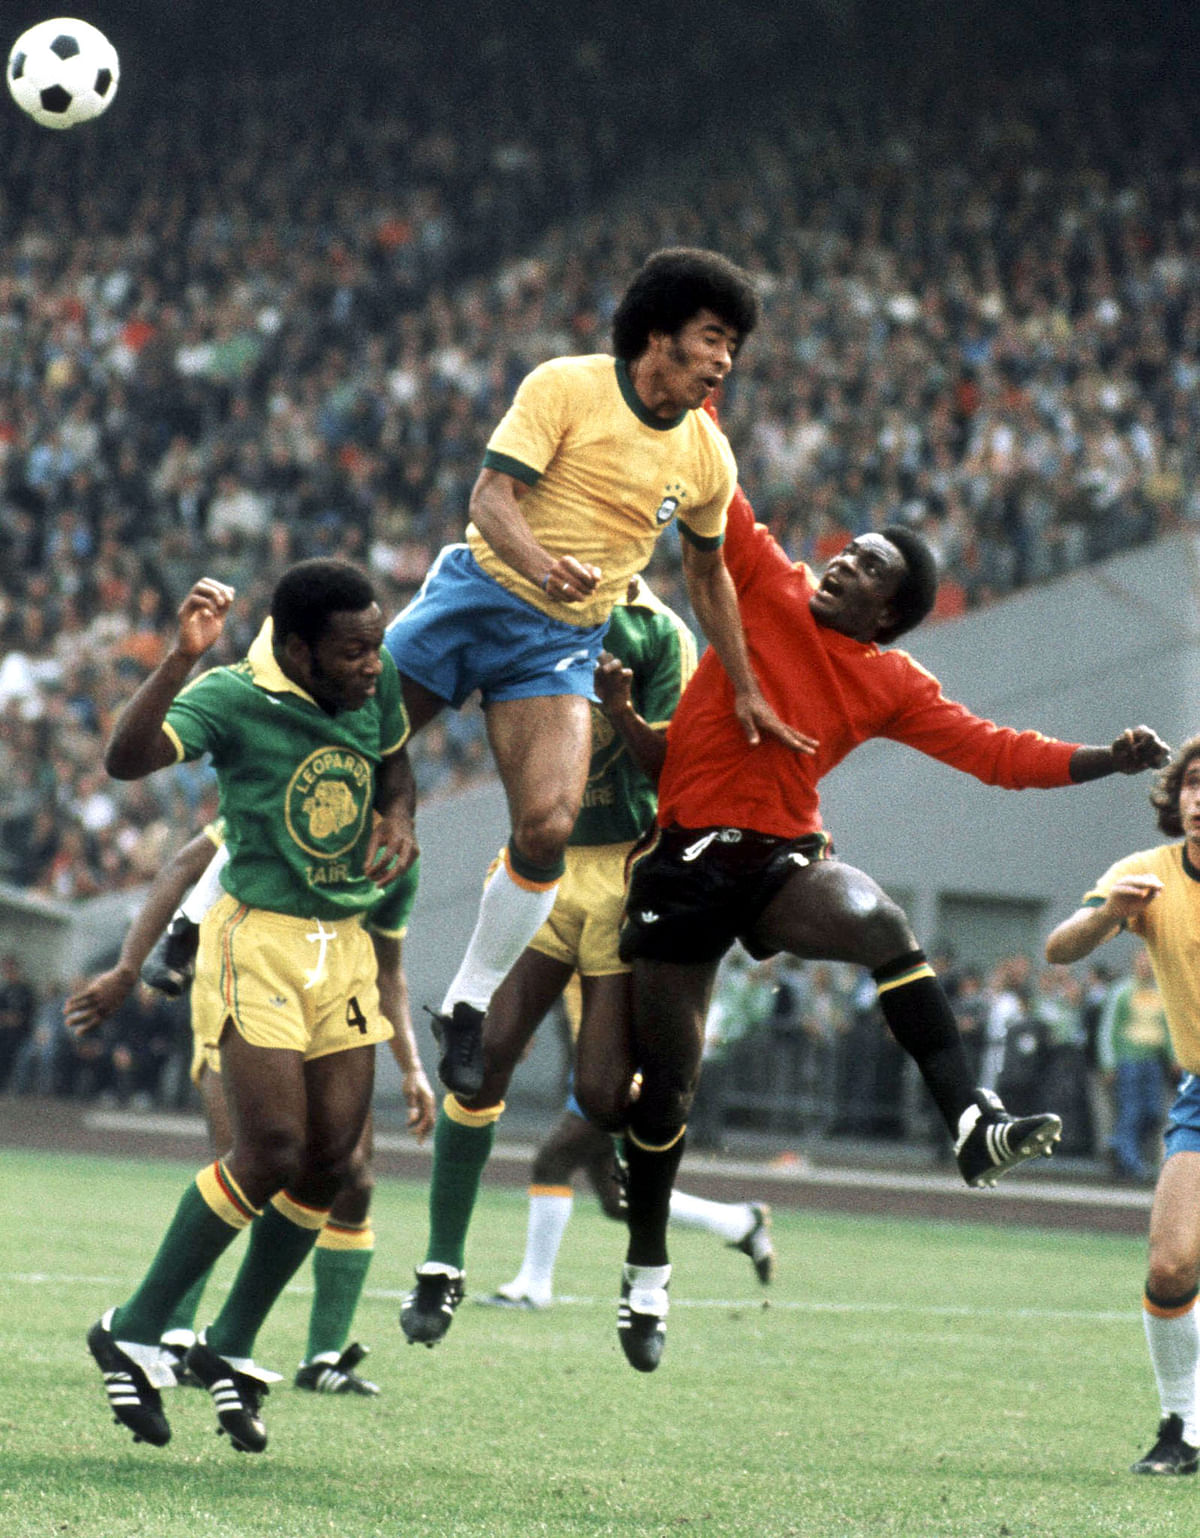 Goalkeeper Muamba Kazadi from Zaire punches the ball away from Brazilian forward Jairzinho during the World Cup first round soccer match between Brazil and Zaire on 22 June 1974 in Gelsenkirchen. Jairzinho scored the first goal for his team as Brazil beat Zaire 3-0. (At left is defender Tshimen Buhanga). Photo: AFP